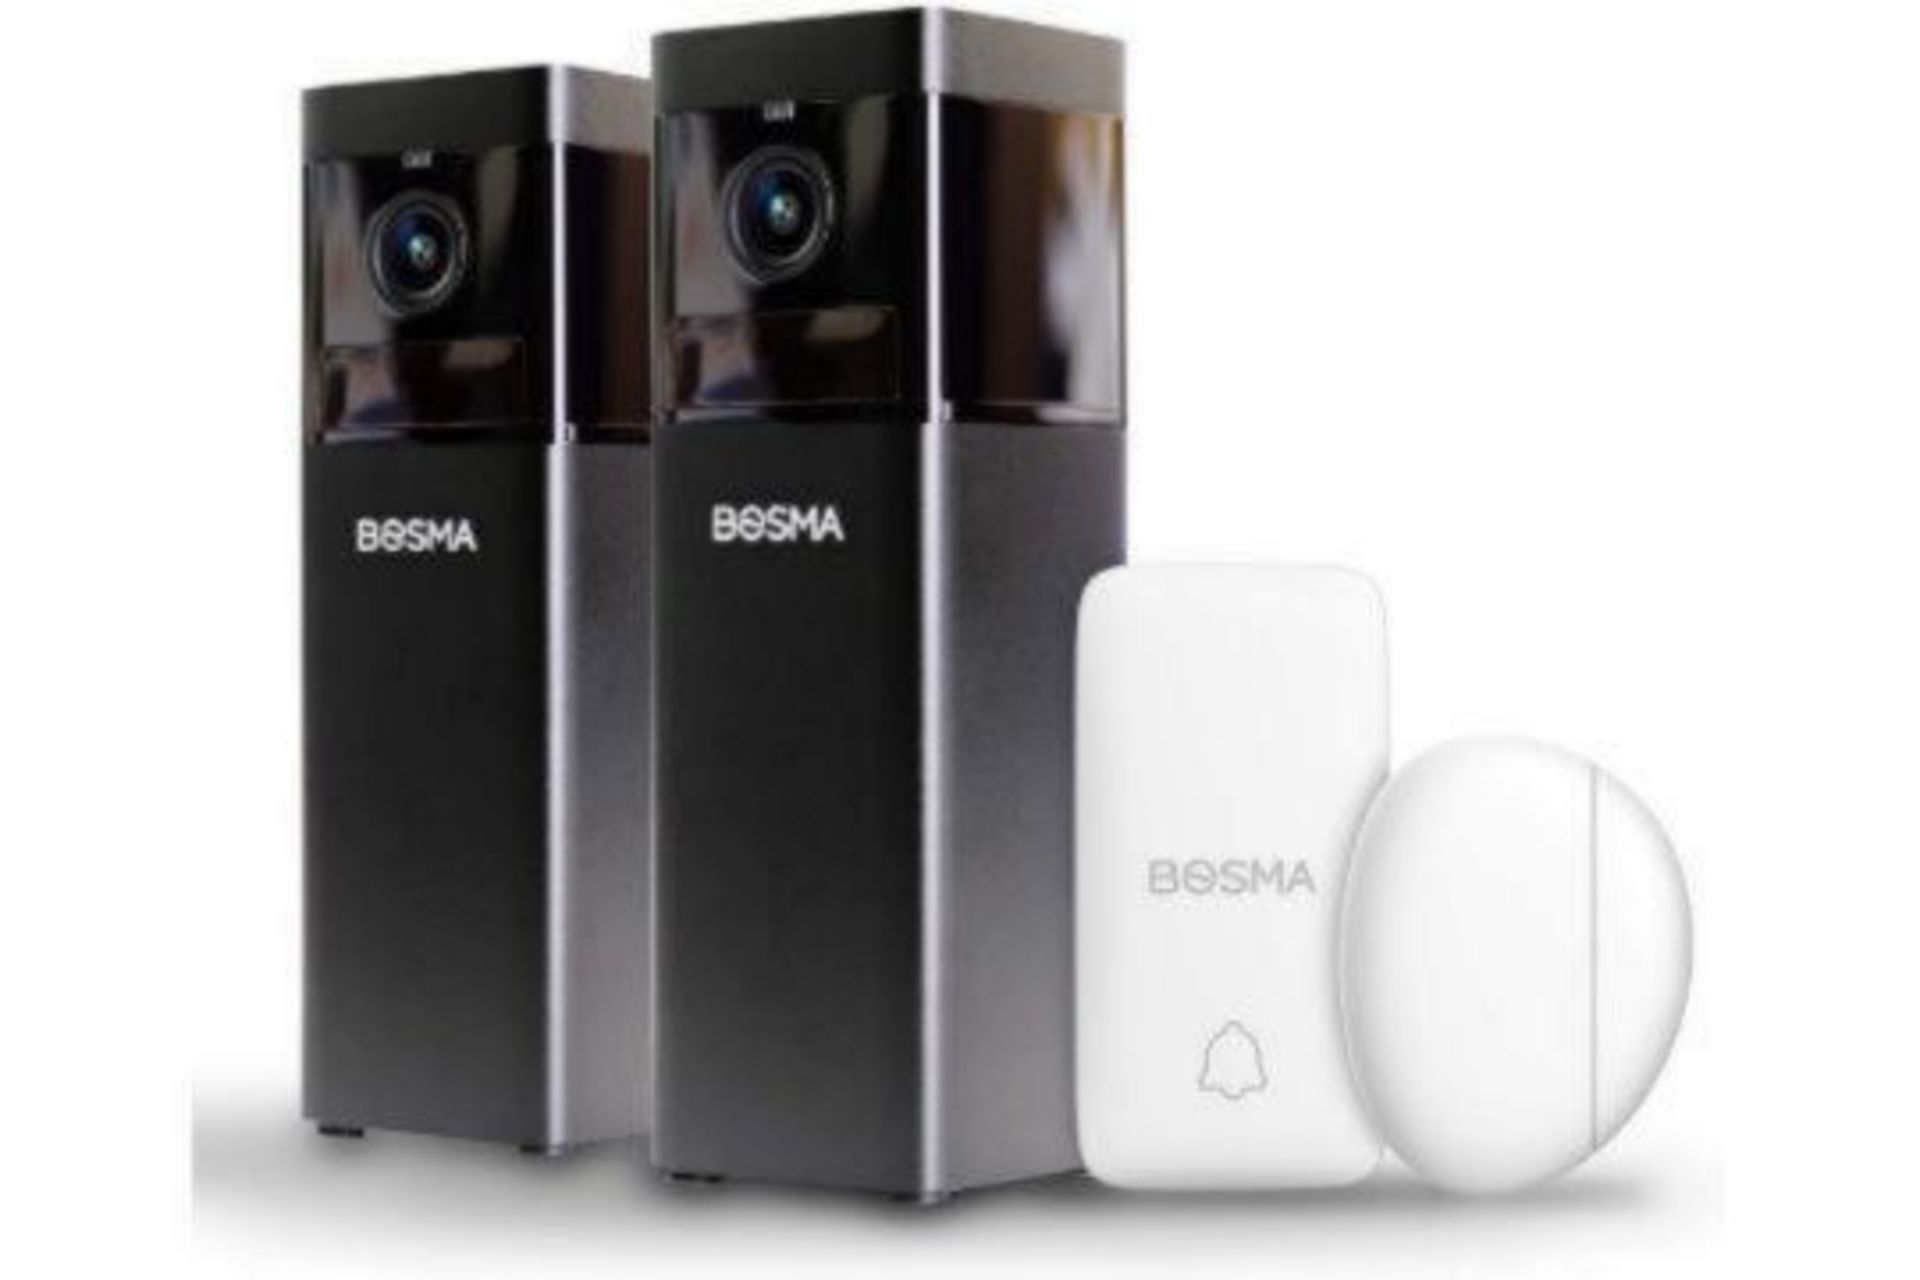 BRAND NEW BOSMA INDOOR SECURITY CAMERA WITH DOOR/WINDOW SENSORS (PACKS OF 2) COLOUR NIGHT VISION,